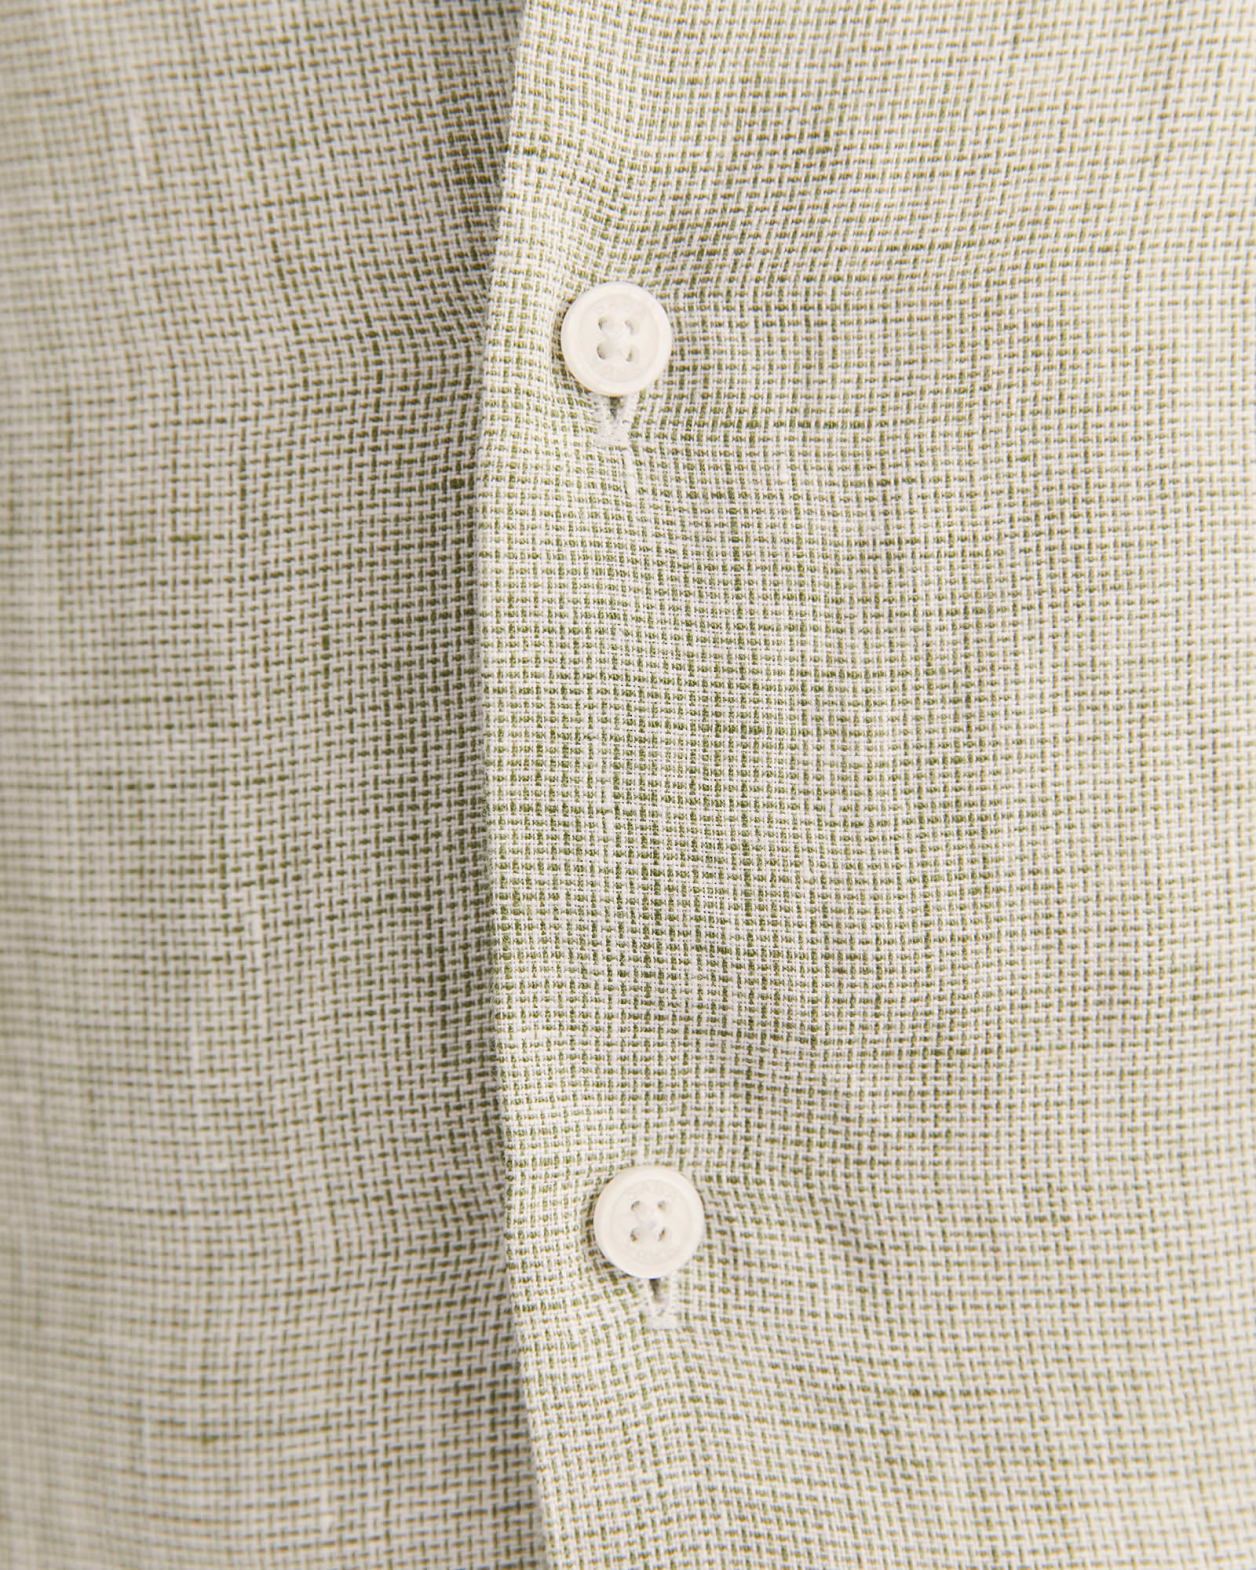 Anderson Classic Yarn Dyed Linen Shirt in GREEN